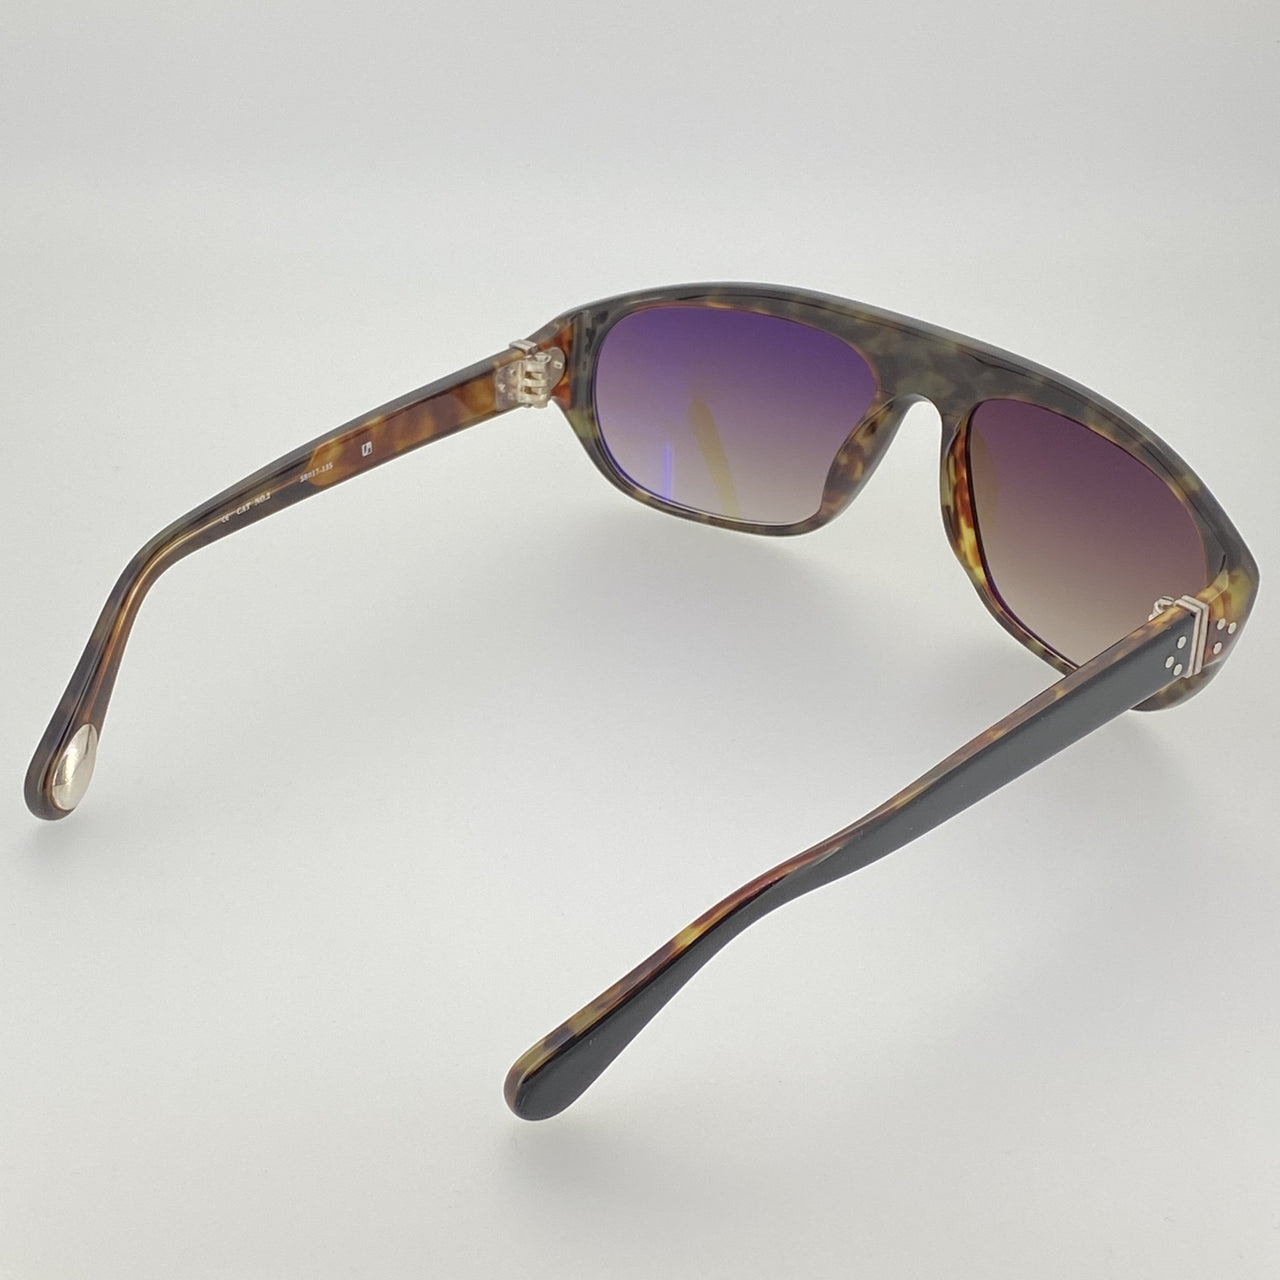 Ann Demeulemeester Sunglasses Black Tortoise Shell Flat Top 925 Silver with Brown Lenses AD1C6SUN - Watches & Crystals